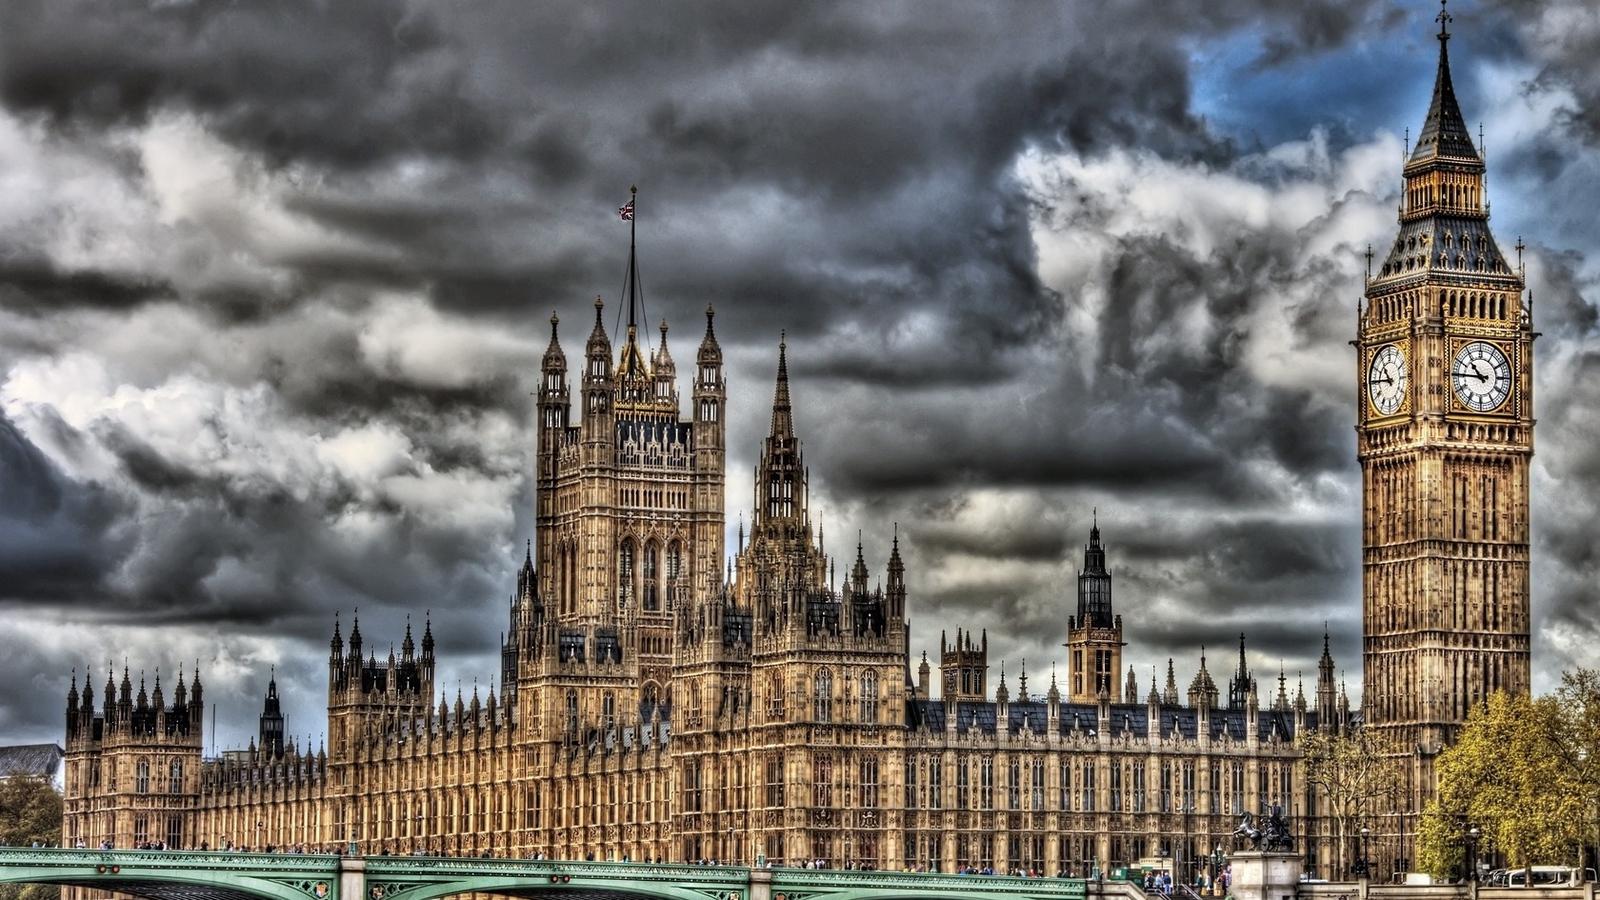 Download wallpaper 1600x900 westminster palace, parliament, houses